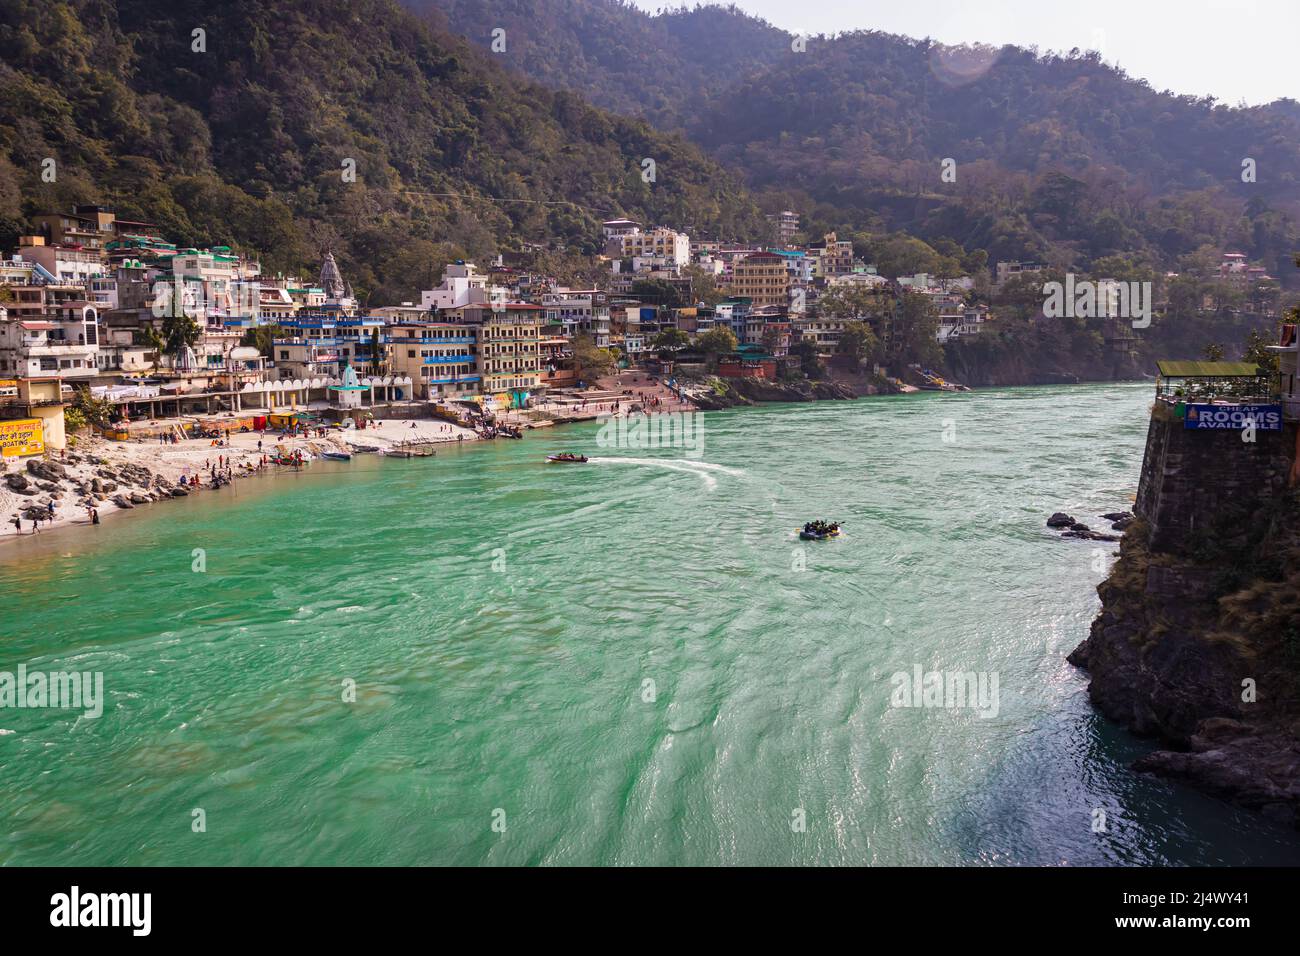 city at river bank with mountain background at day from flat angle image is taken at rishikesh uttrakhand india on Mar 15 2022. Stock Photo